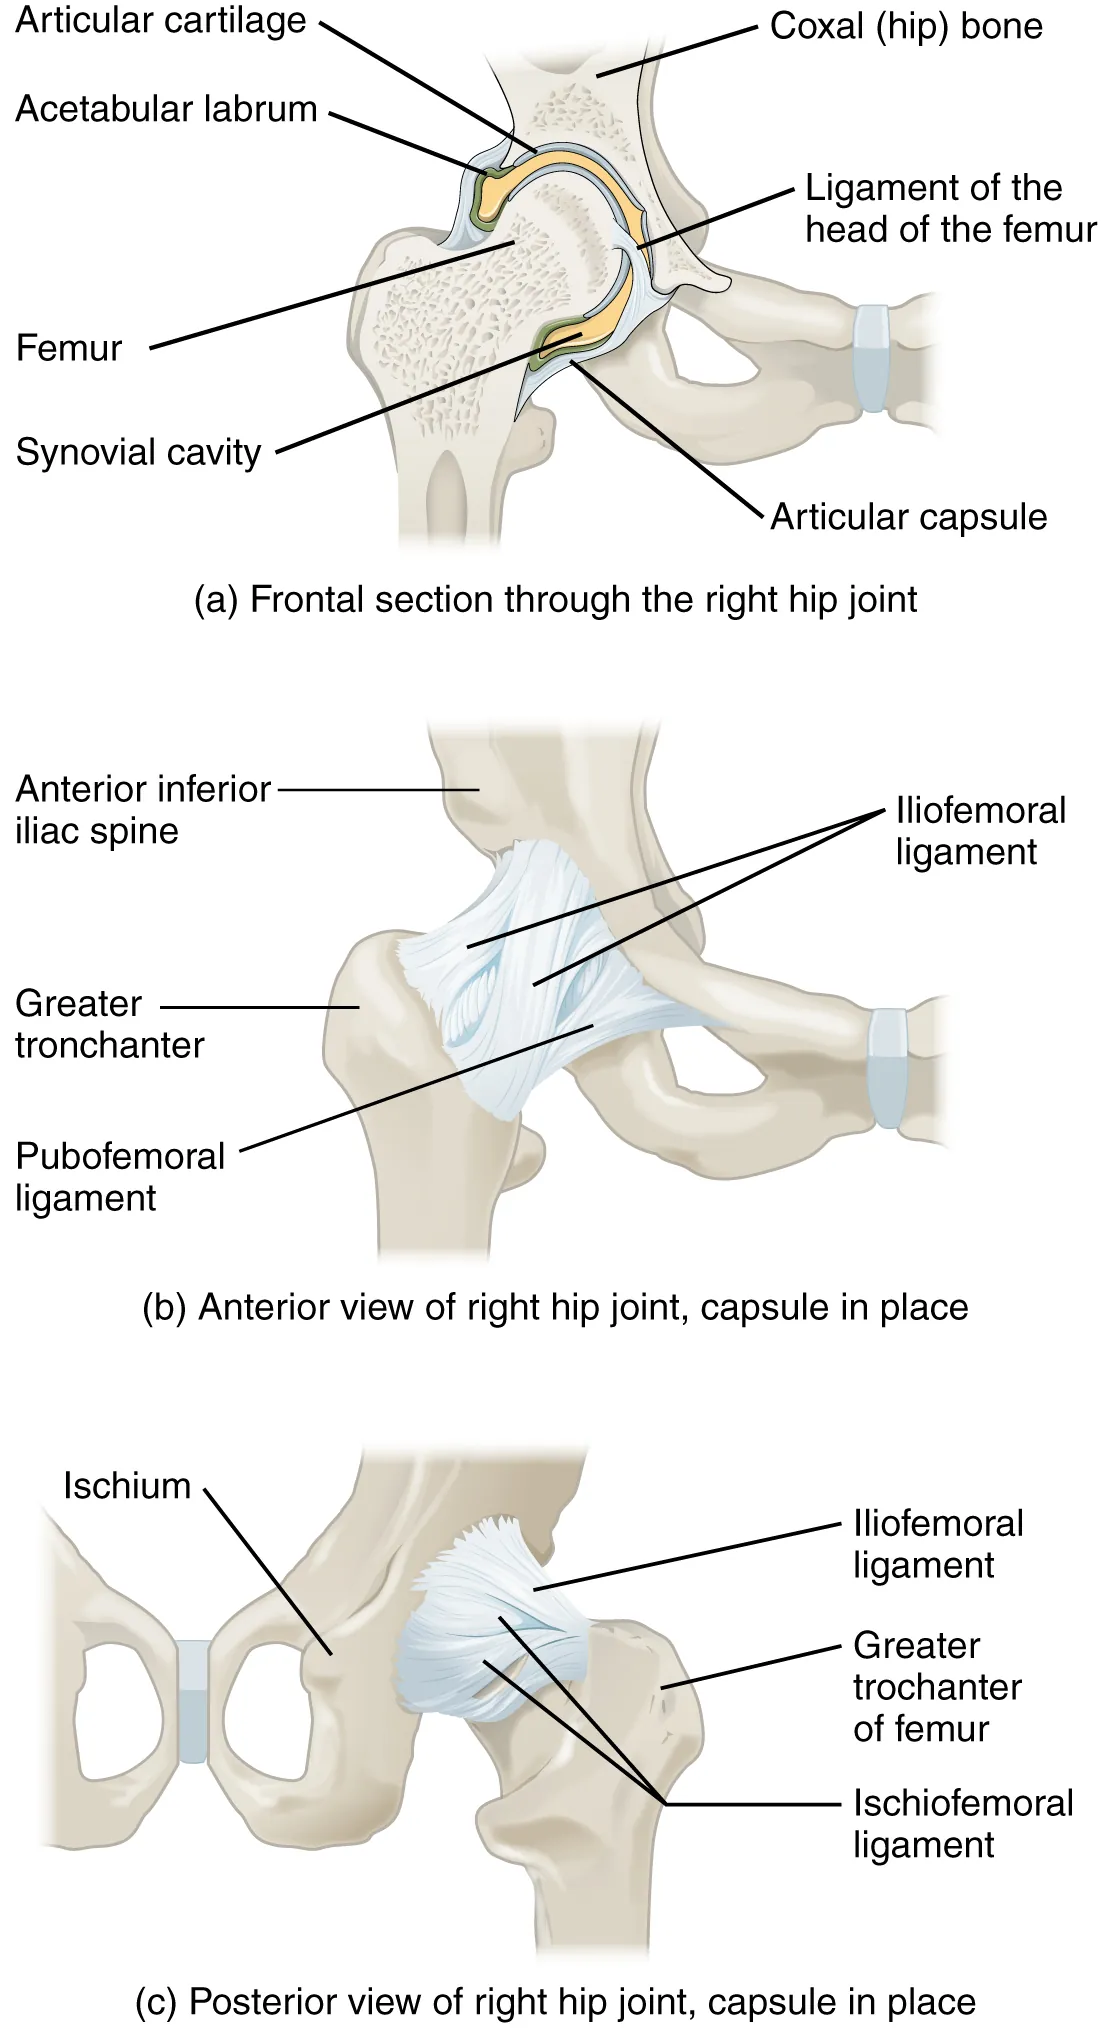 This figure shows different views of the hip joint. The top panel shows the frontal view of the right hip joint, the middle panel shows the anterior view, and the bottom panel shows the posterior view.